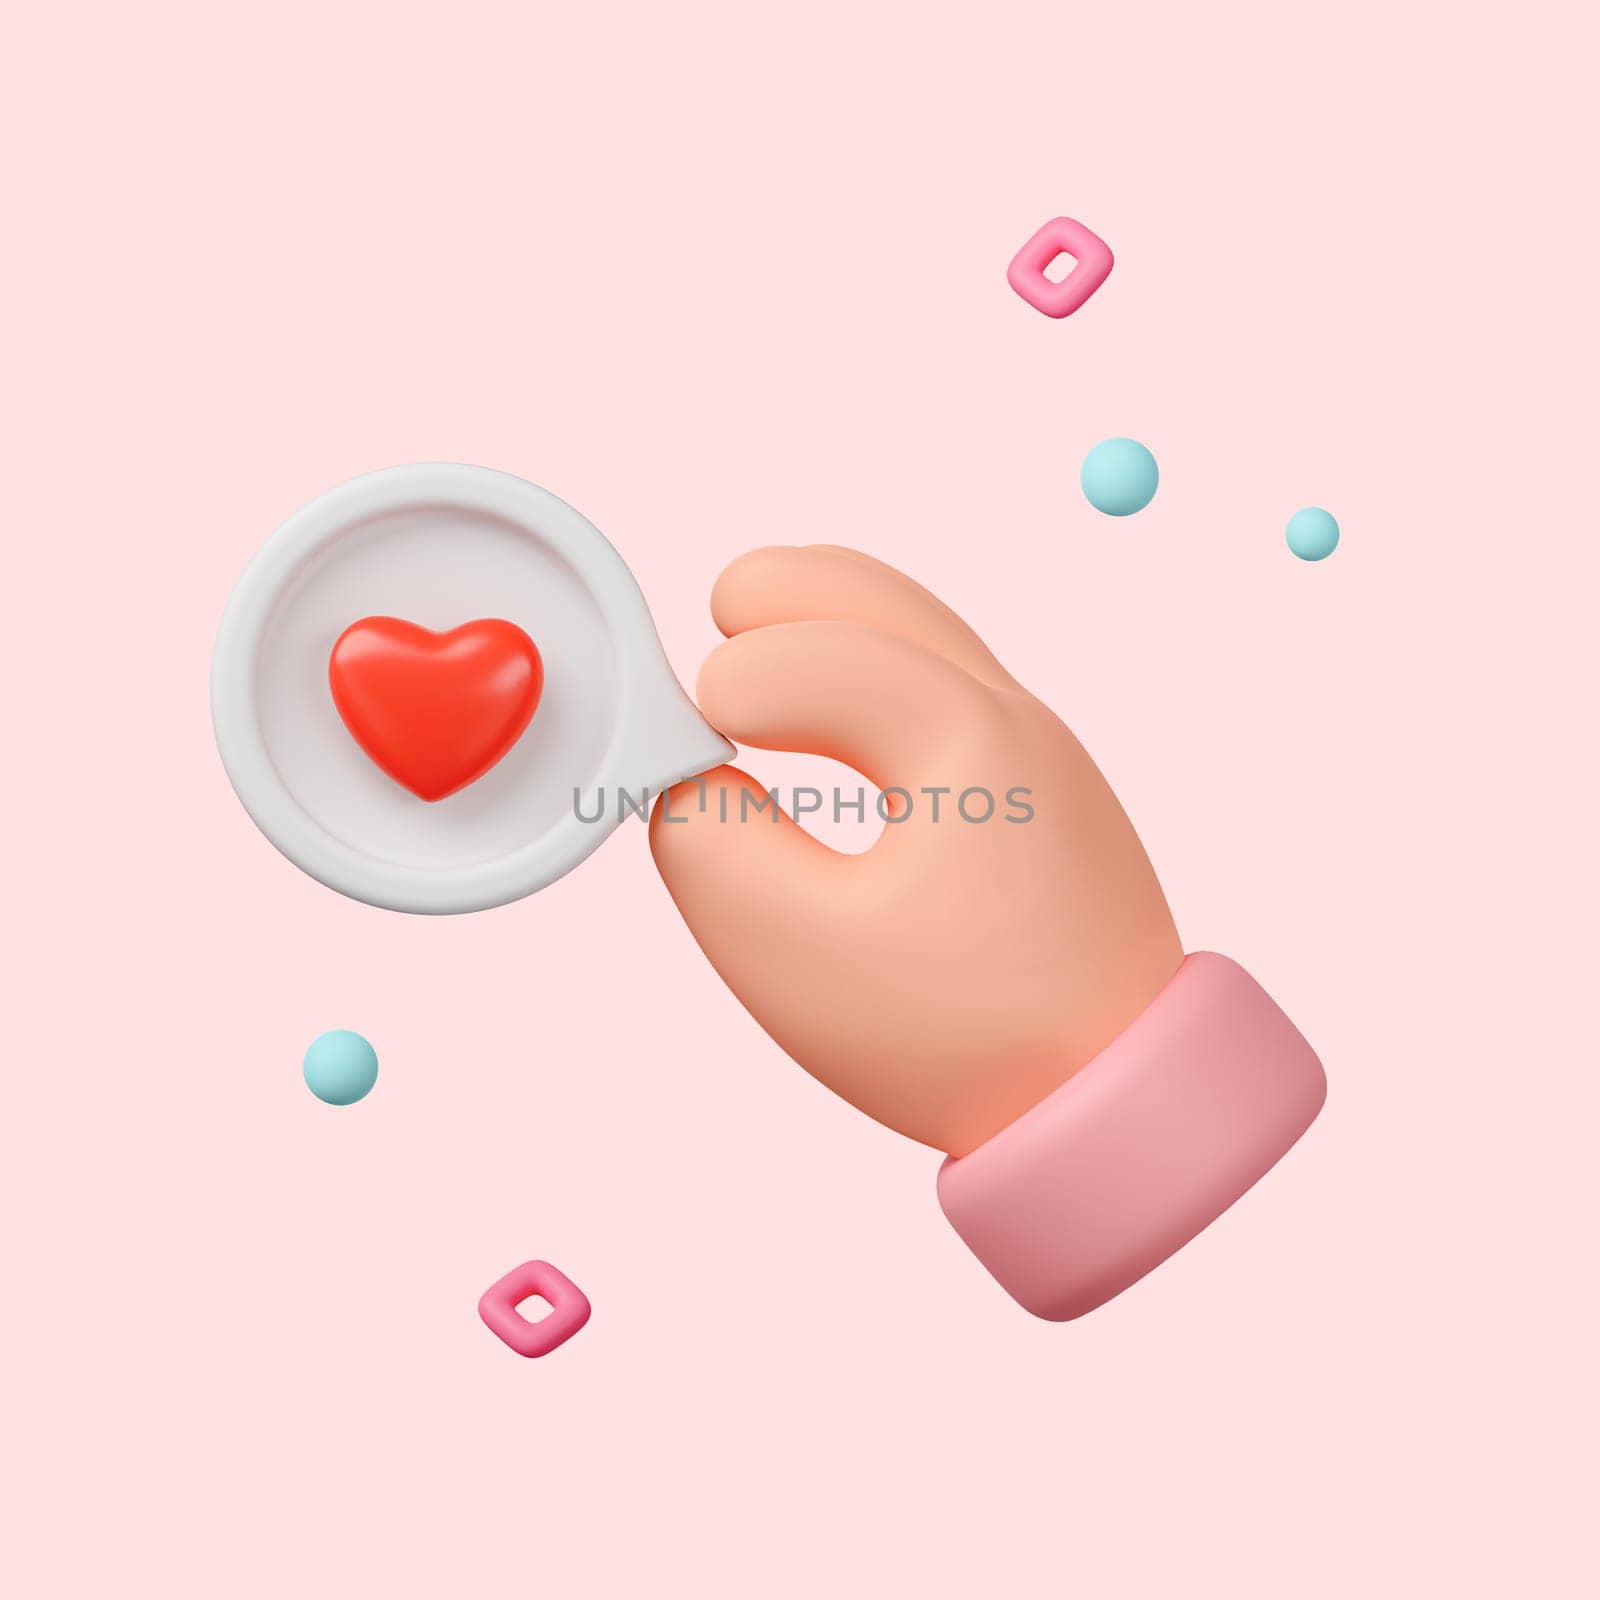 Cartoon character hand hold and give like symbol icon on a white pin and red heart isolated over pink background with clipping path. 3d rendering by meepiangraphic